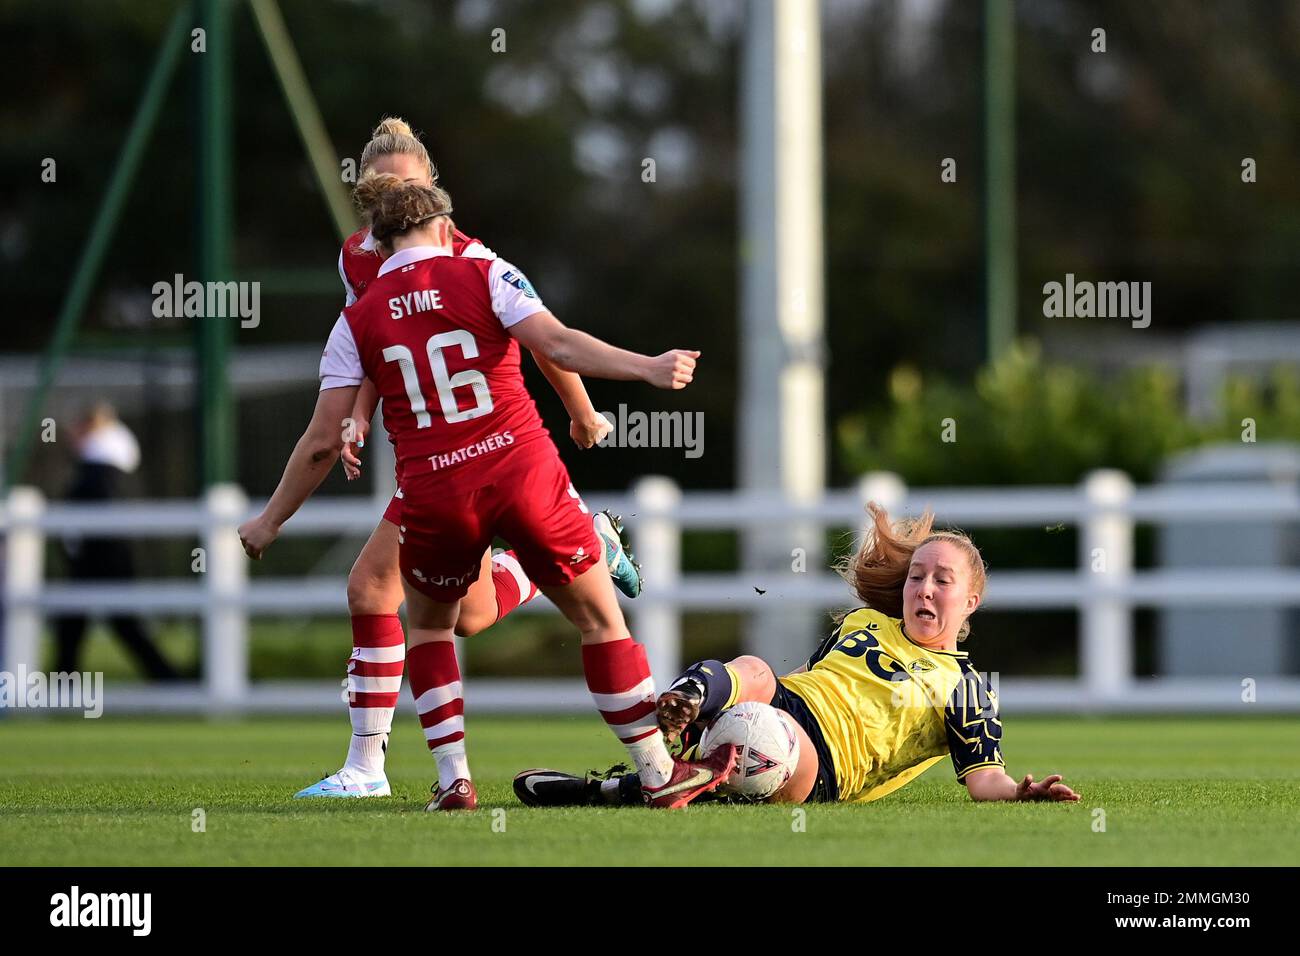 Bristol, UK. 29th January, 2023. Emily Syme of Bristol City Women is fouled by Lacy-Jai Liggett of Oxford United W.F.C. - Mandatory by-line: Ashley Crowden  - 29/01/2023 - FOOTBALL - Robins High Performance Centre - Bristol, England - Bristol City Women vs Oxford United Women - The Women's FA Cup - Fourth Round Credit: Ashley Crowden/Alamy Live News Stock Photo